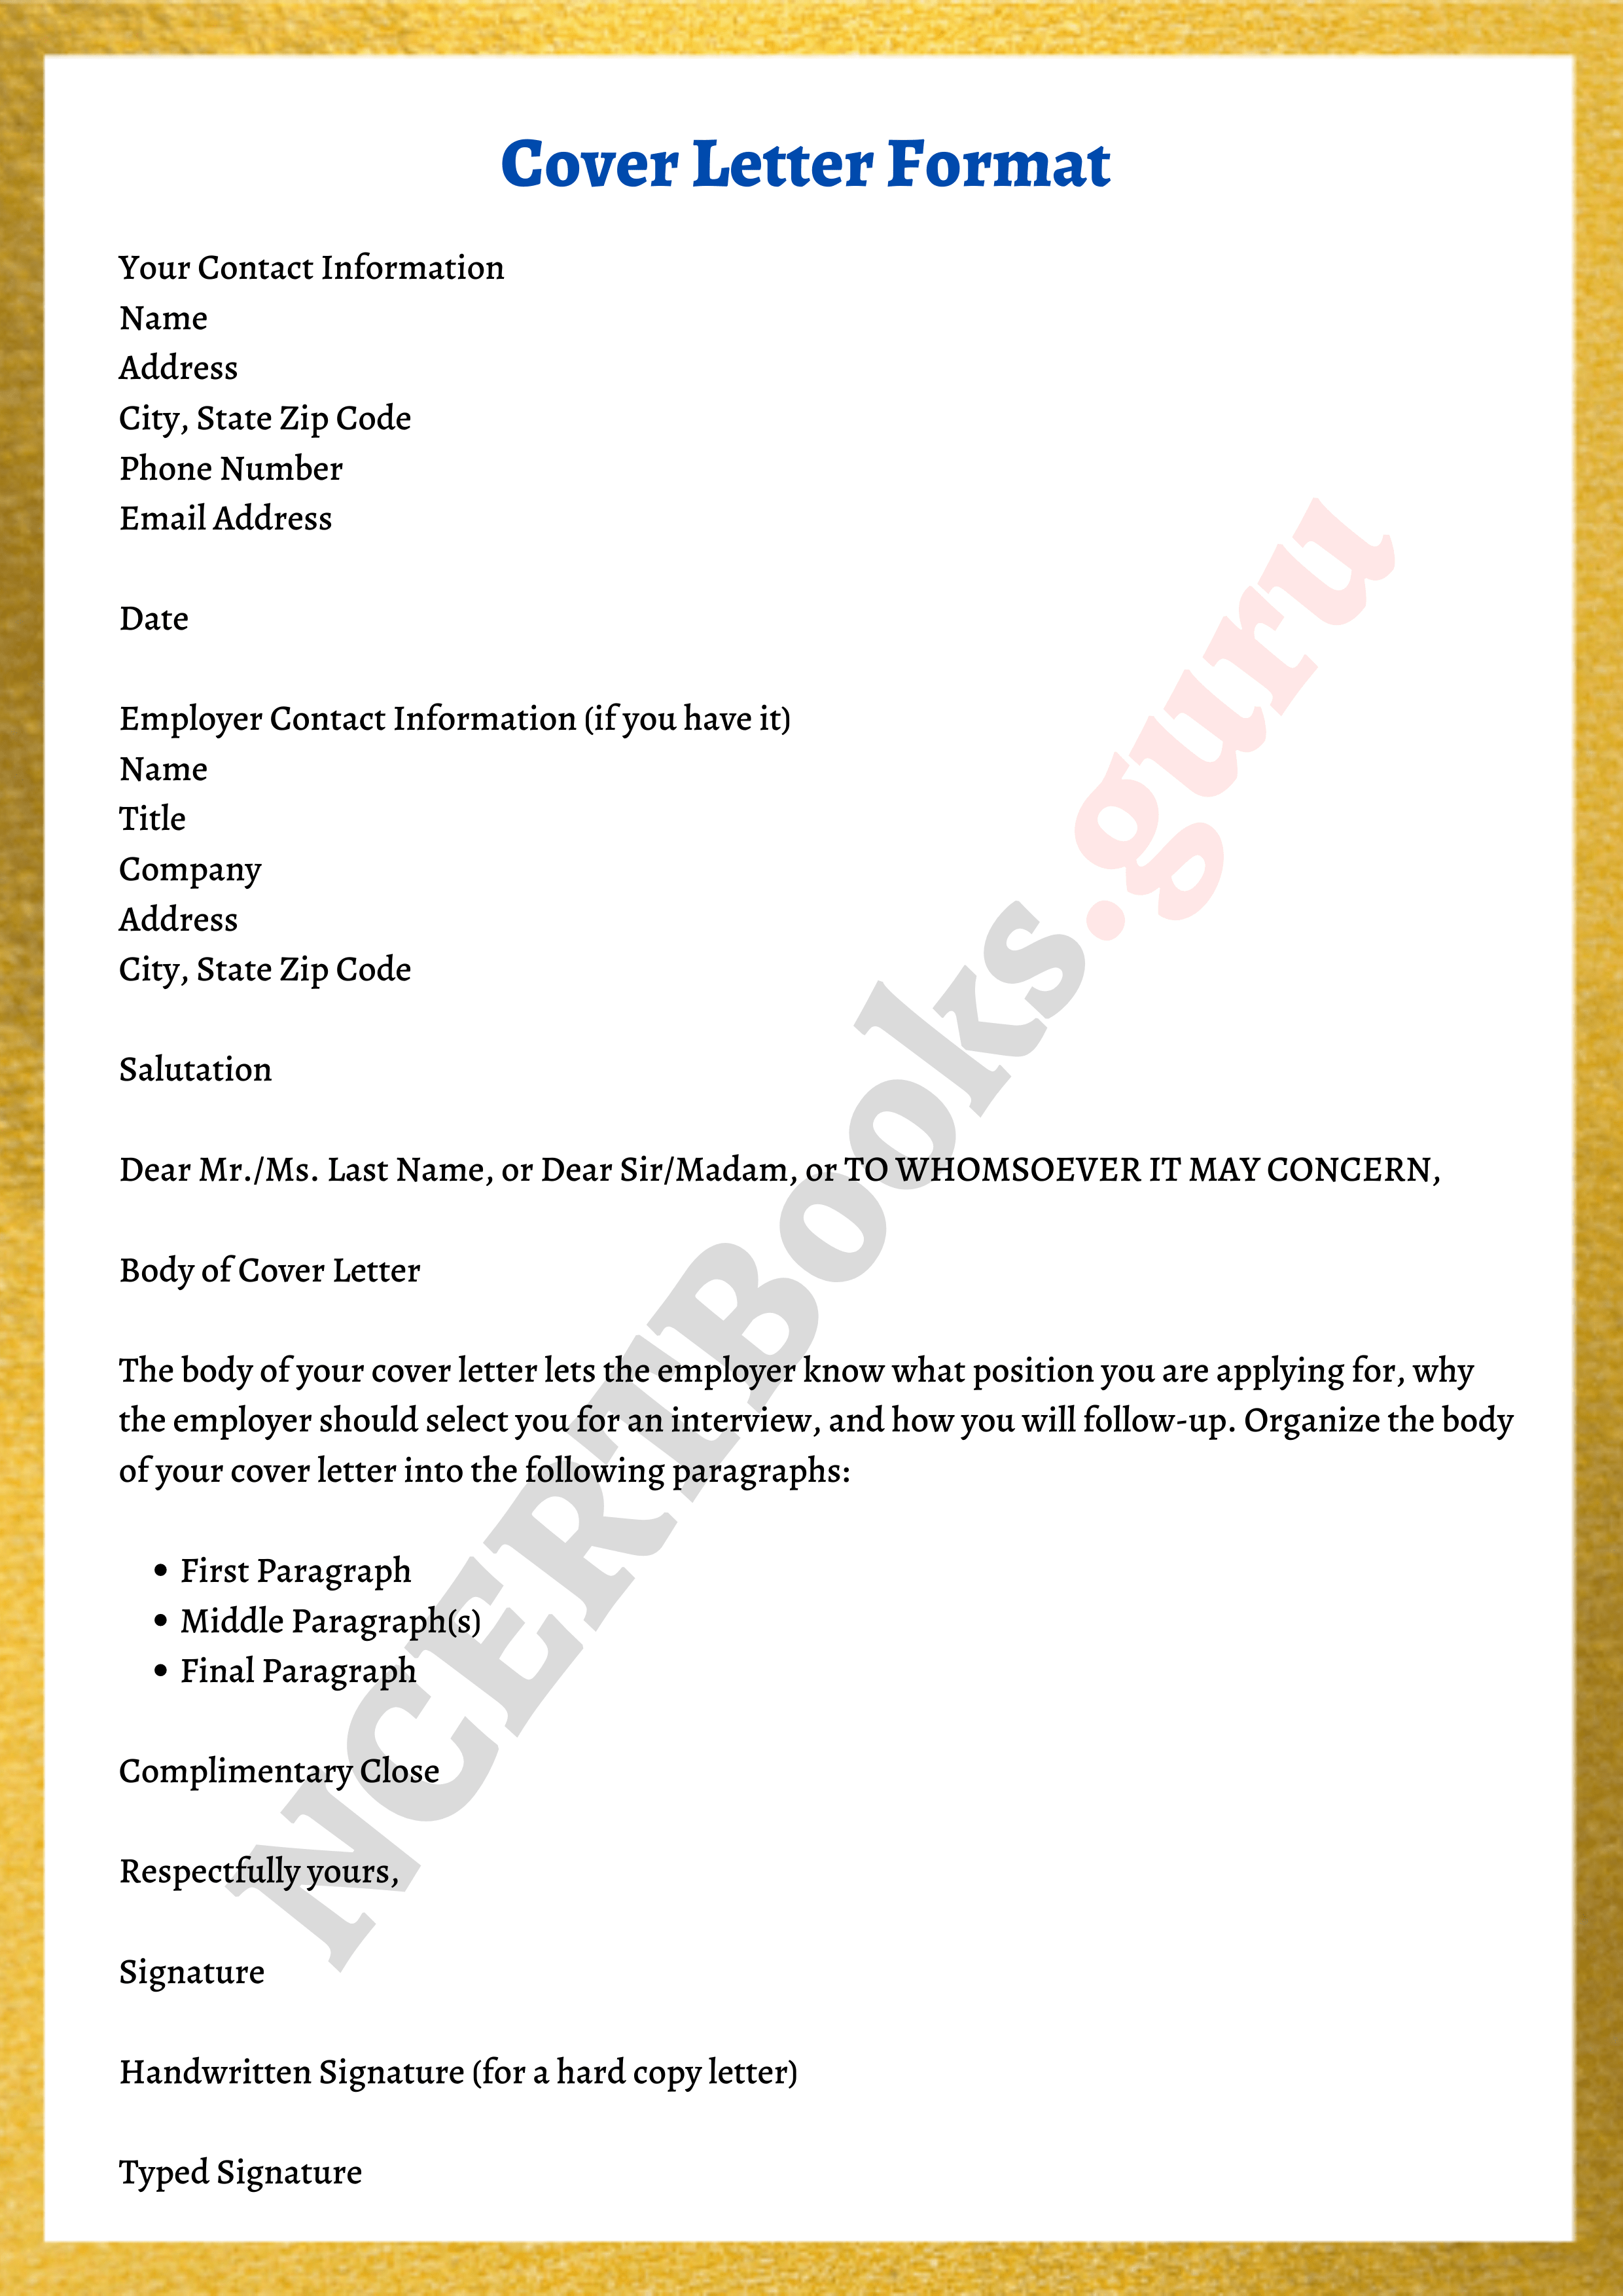 format of cover letter